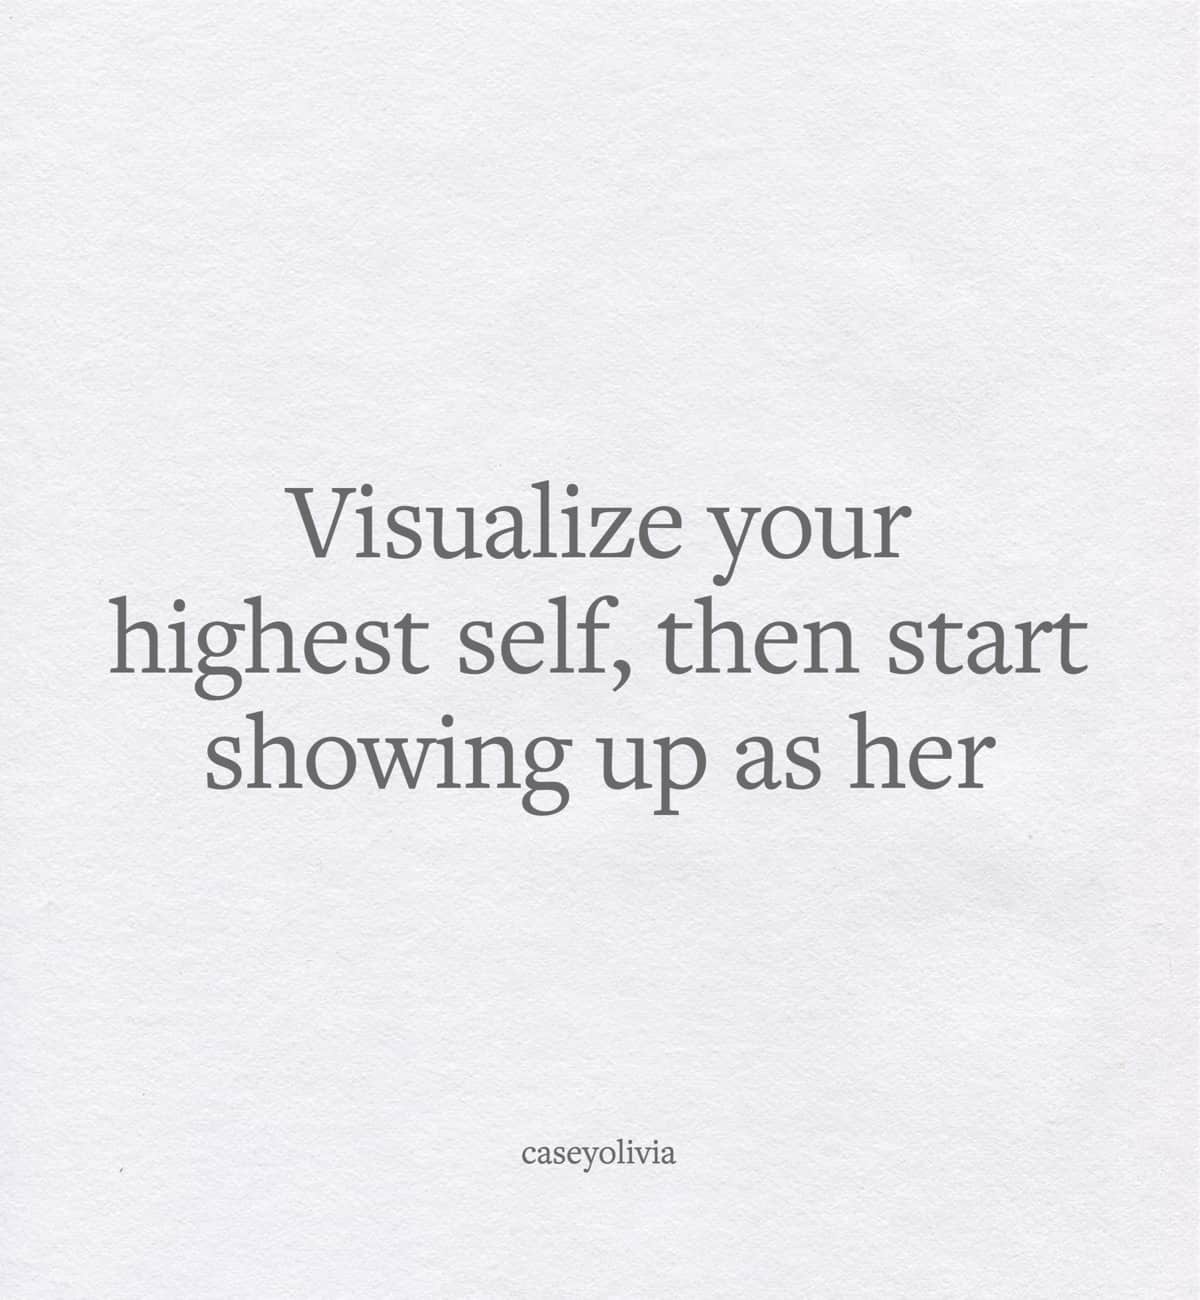 visualize your highest self boss quote